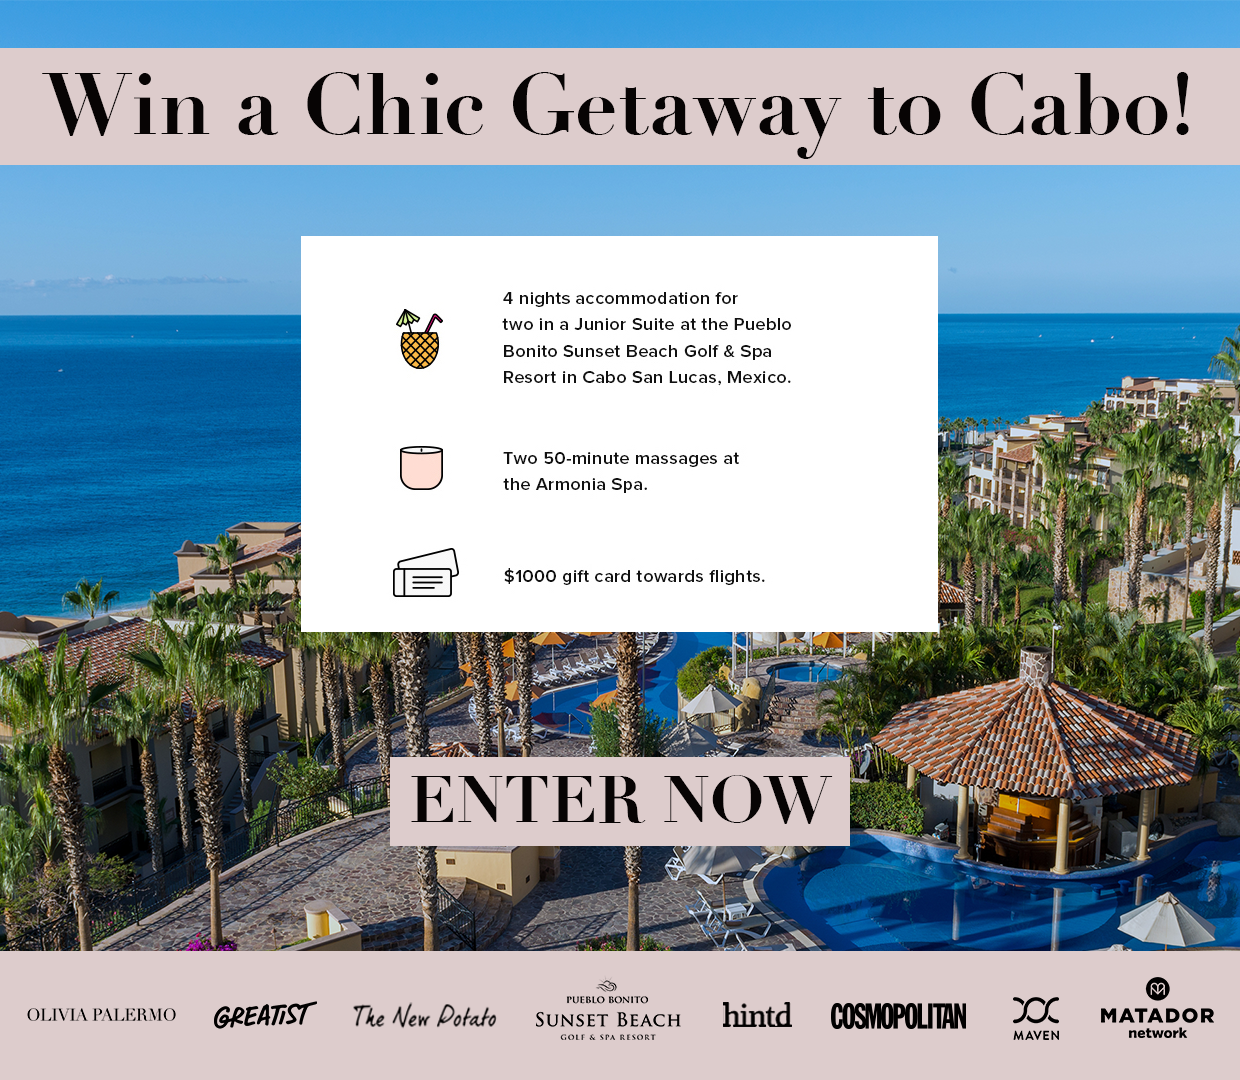 Win a Chic Getaway to Cabo San Lucas!